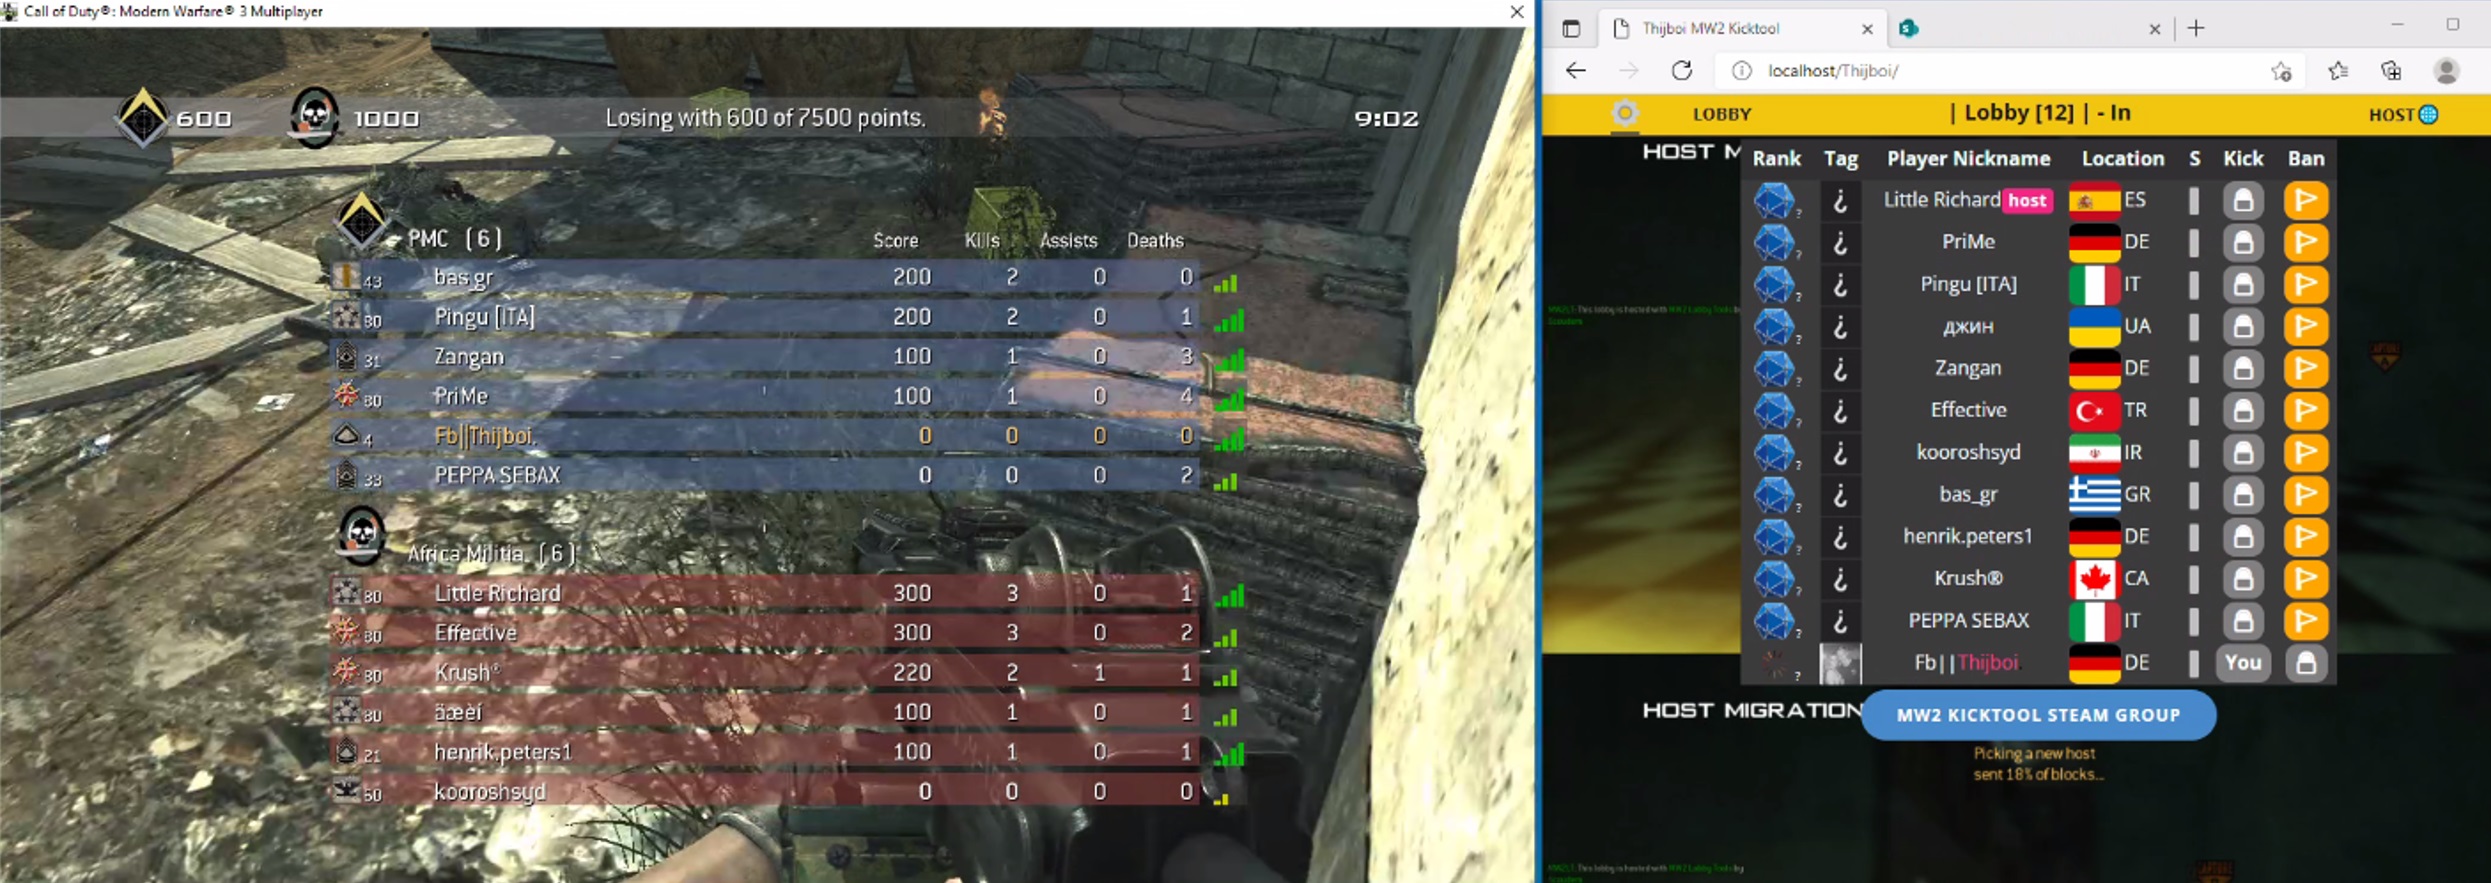 Call of Duty: Modern Warfare 2 - Multiplayer How to Download Kicktool Setup Guide - Kicktool Layout Examples for MW2 & MW3 - D2FB5C2